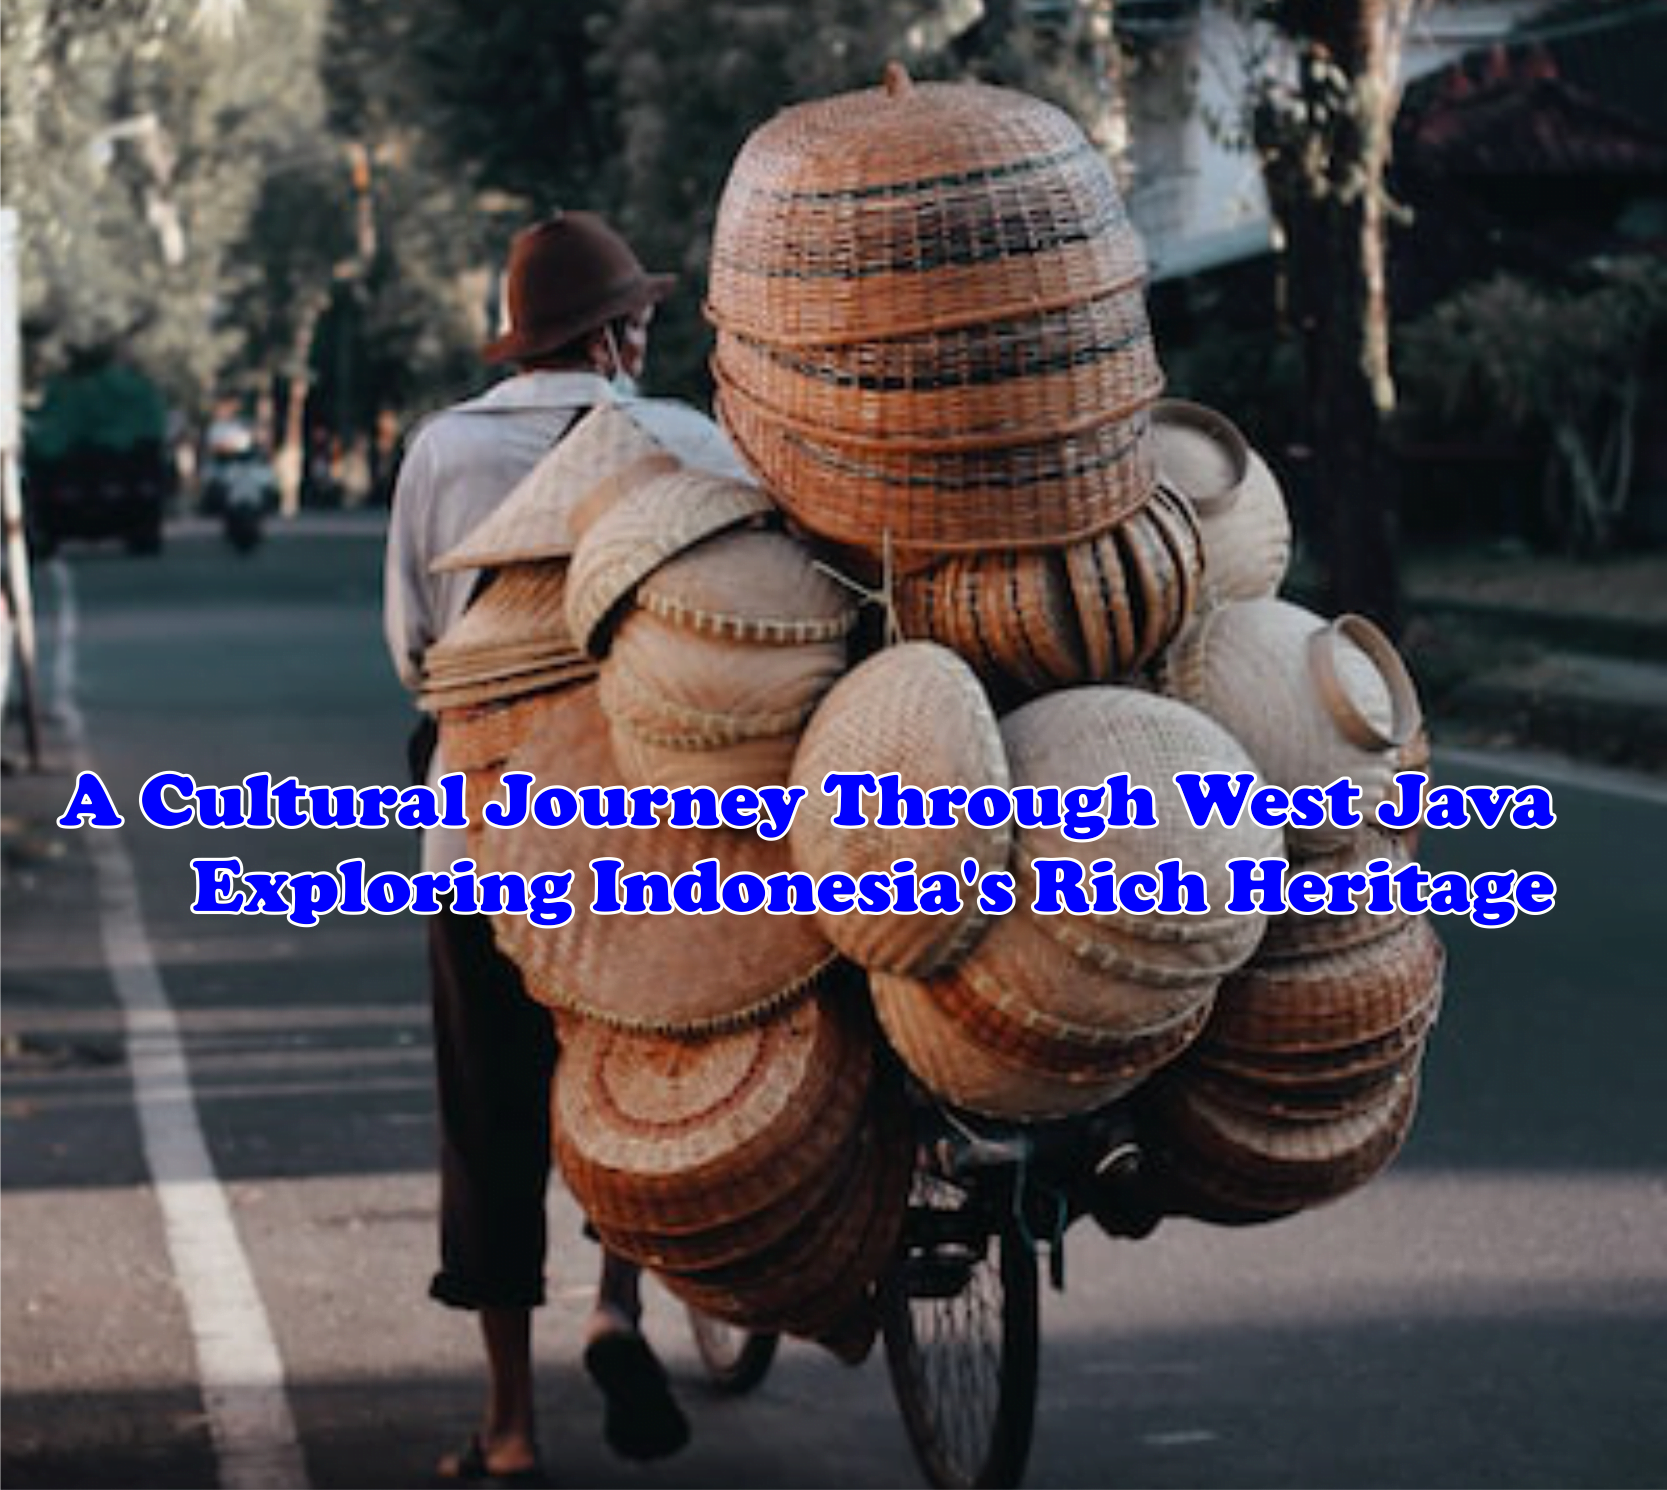 A Cultural Journey Through West Java: Exploring Indonesia's Rich Heritage